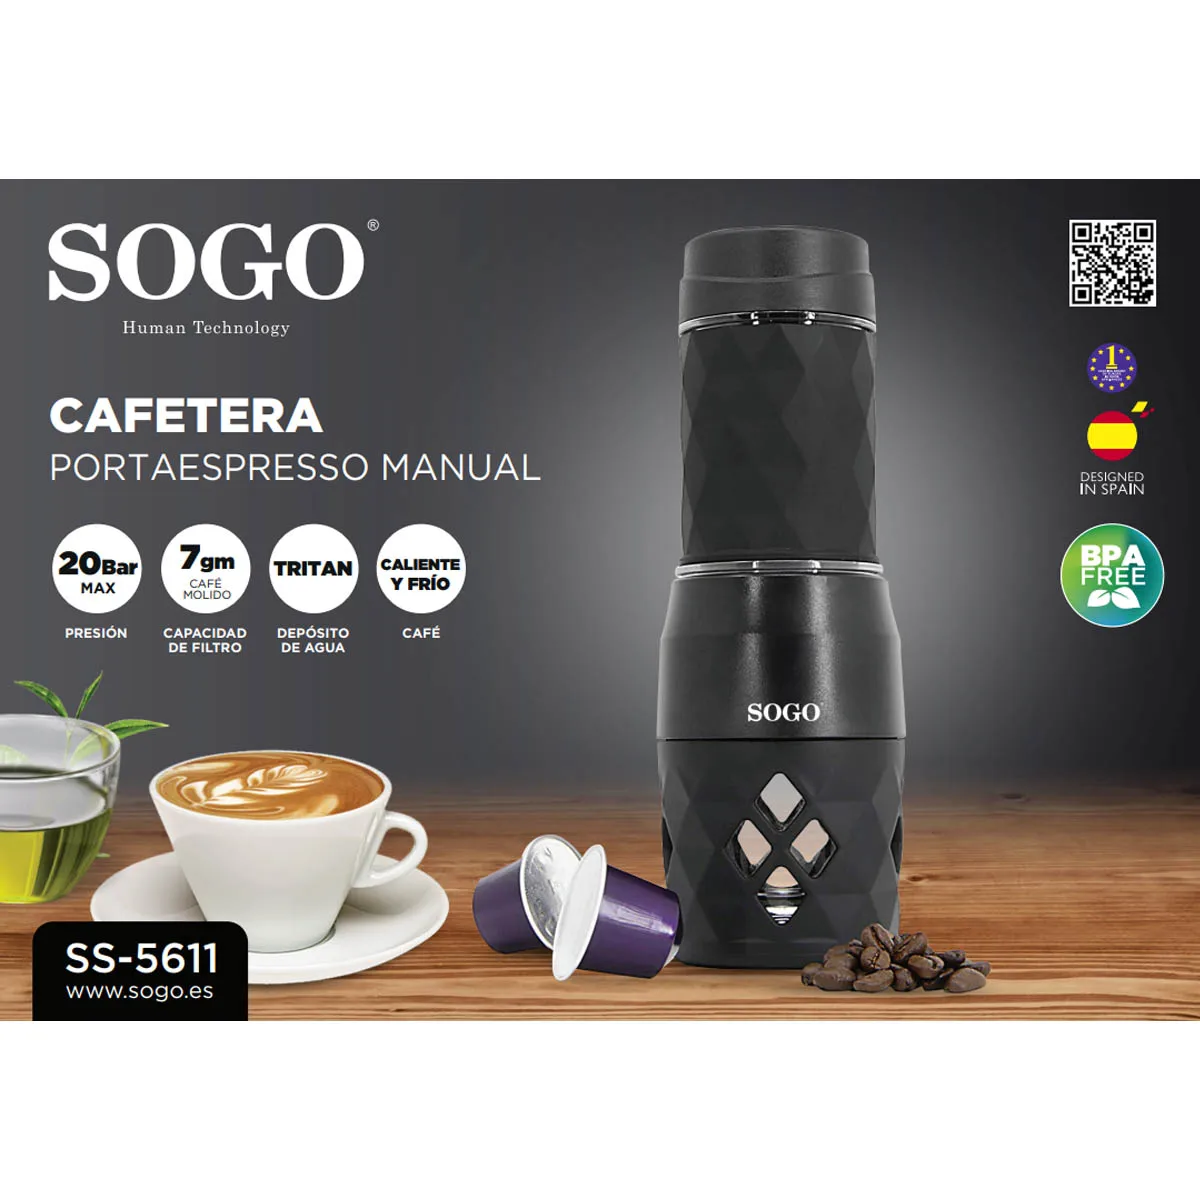 Espresso coffee machine manual 2 in 1 of Sogo, perfect for making hot and  cold espresso coffee, cappuccino, latte, tea and iced tea, for use in camps  or travel espresso coffee maker